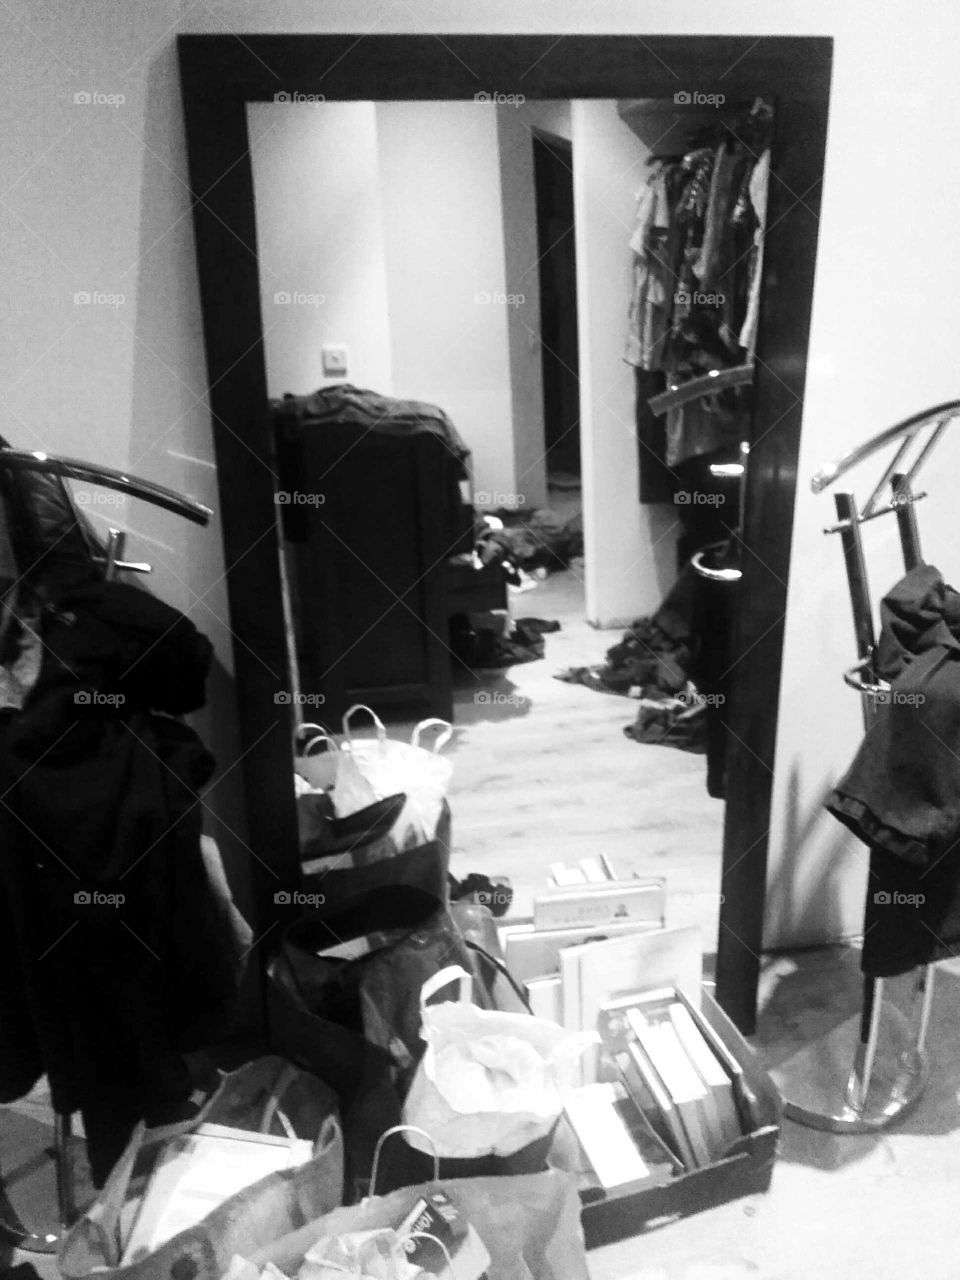 Messy dressing room floor - bags of clothes, boxes of books and various items of clothing  strewn on dressing room floor, with a clear pathway in between all the untidiness captured in a timber framed mirror.